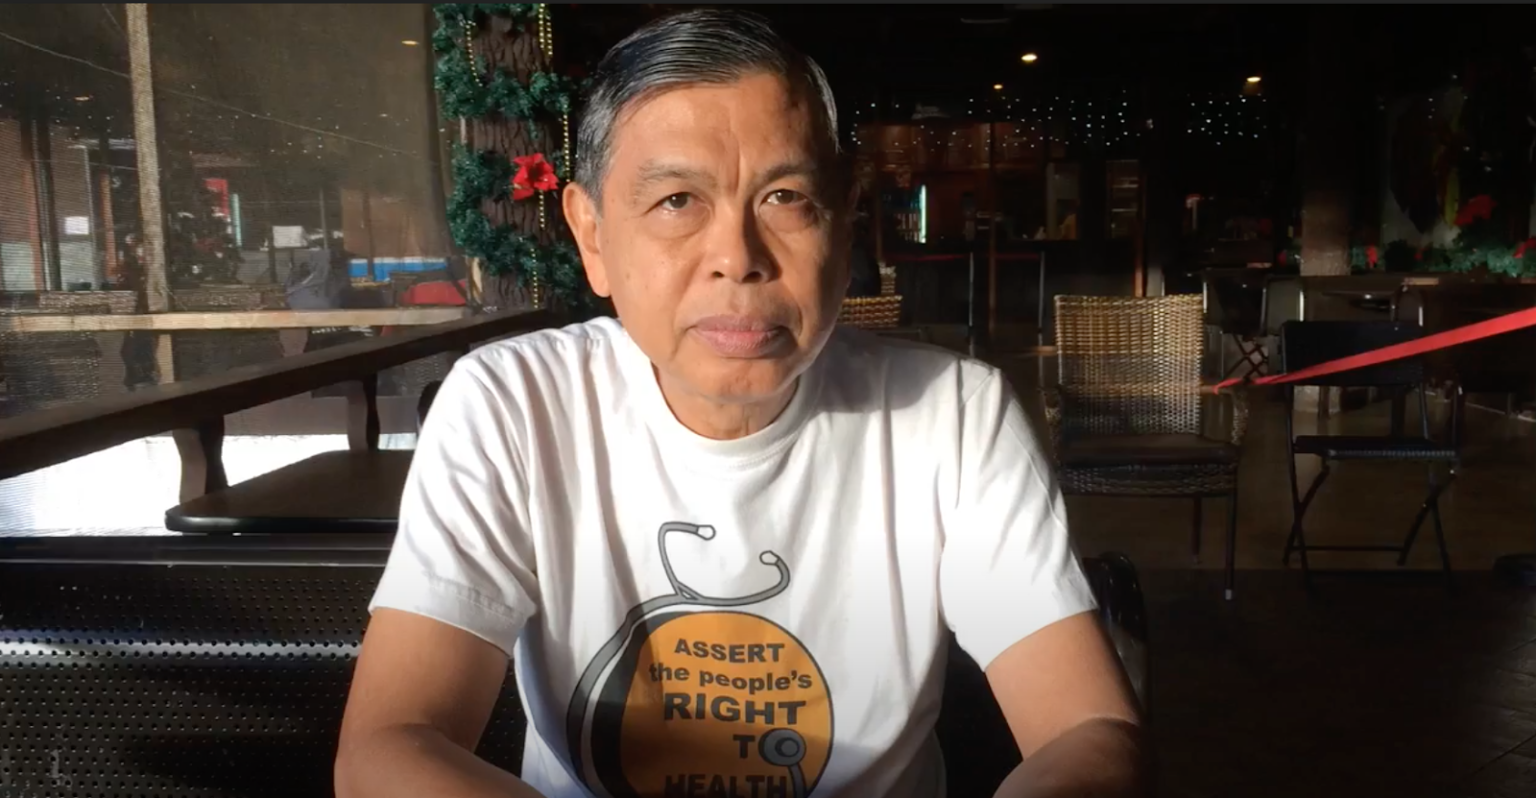 photo of a man, Dr. Romeo Quijano, his shirt reads 'assert the people’s right to health'.